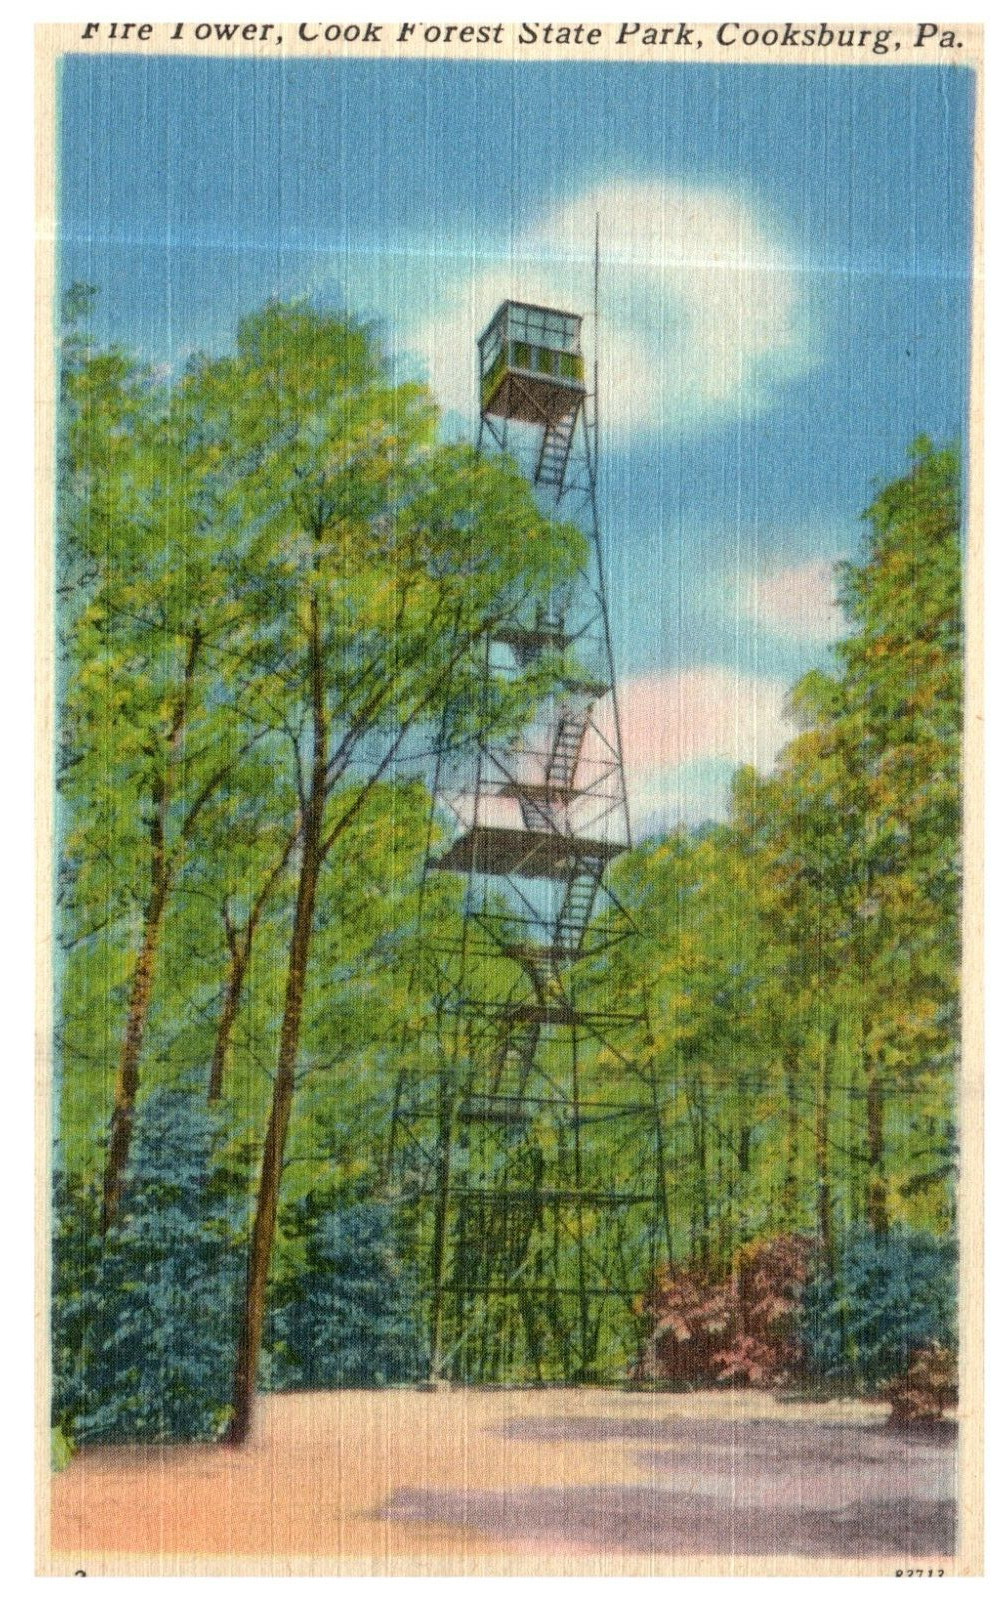 Pennsylvania Cook Forest State Park Fire Tower c1930 Vintage PA Postcard-Q2-44